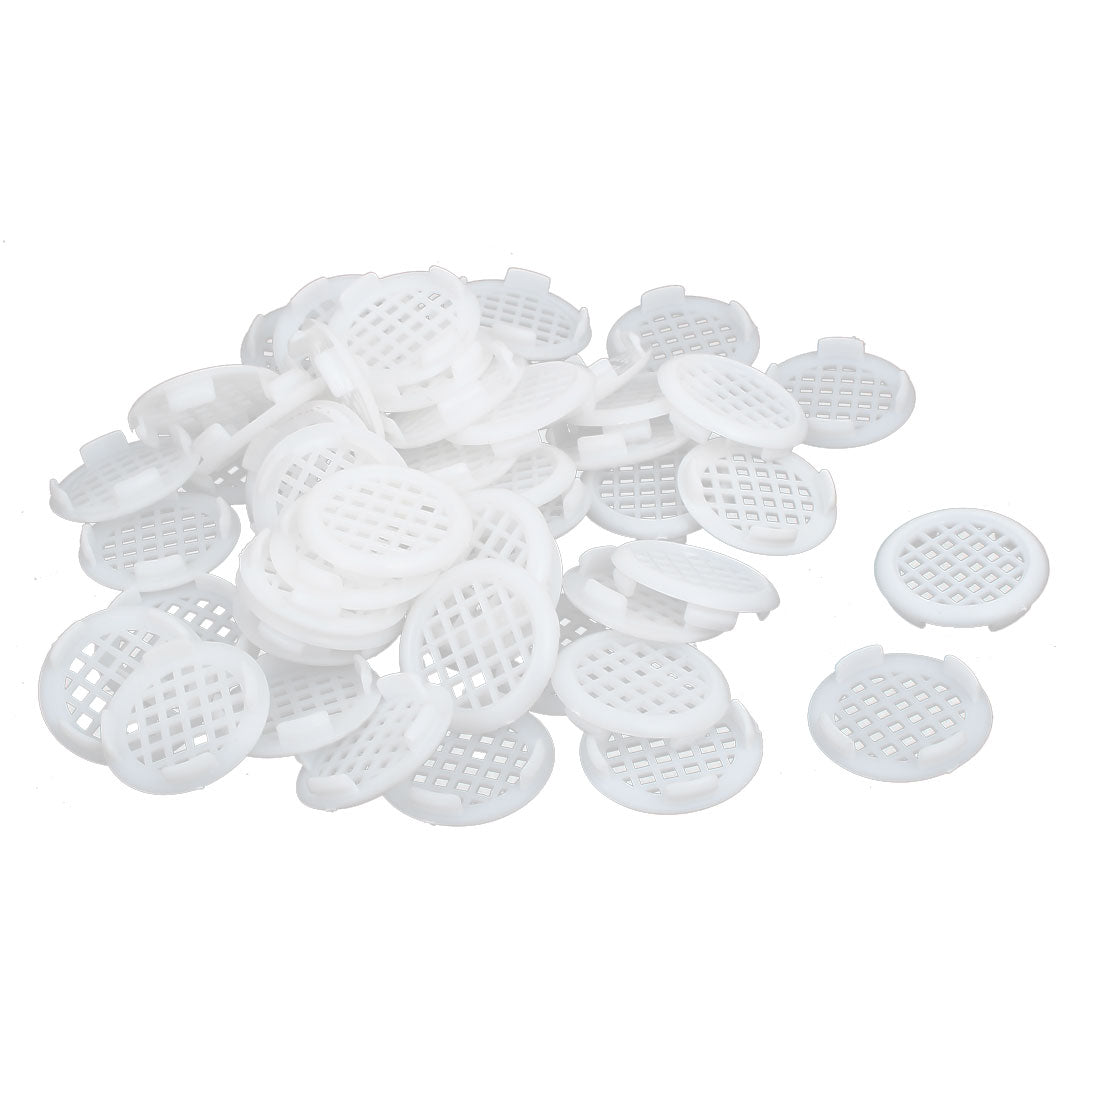 uxcell Uxcell Shoes Cabinet Plastic Square Mesh Hole Air Vent Louver Cover White 31mm Dia 50pcs